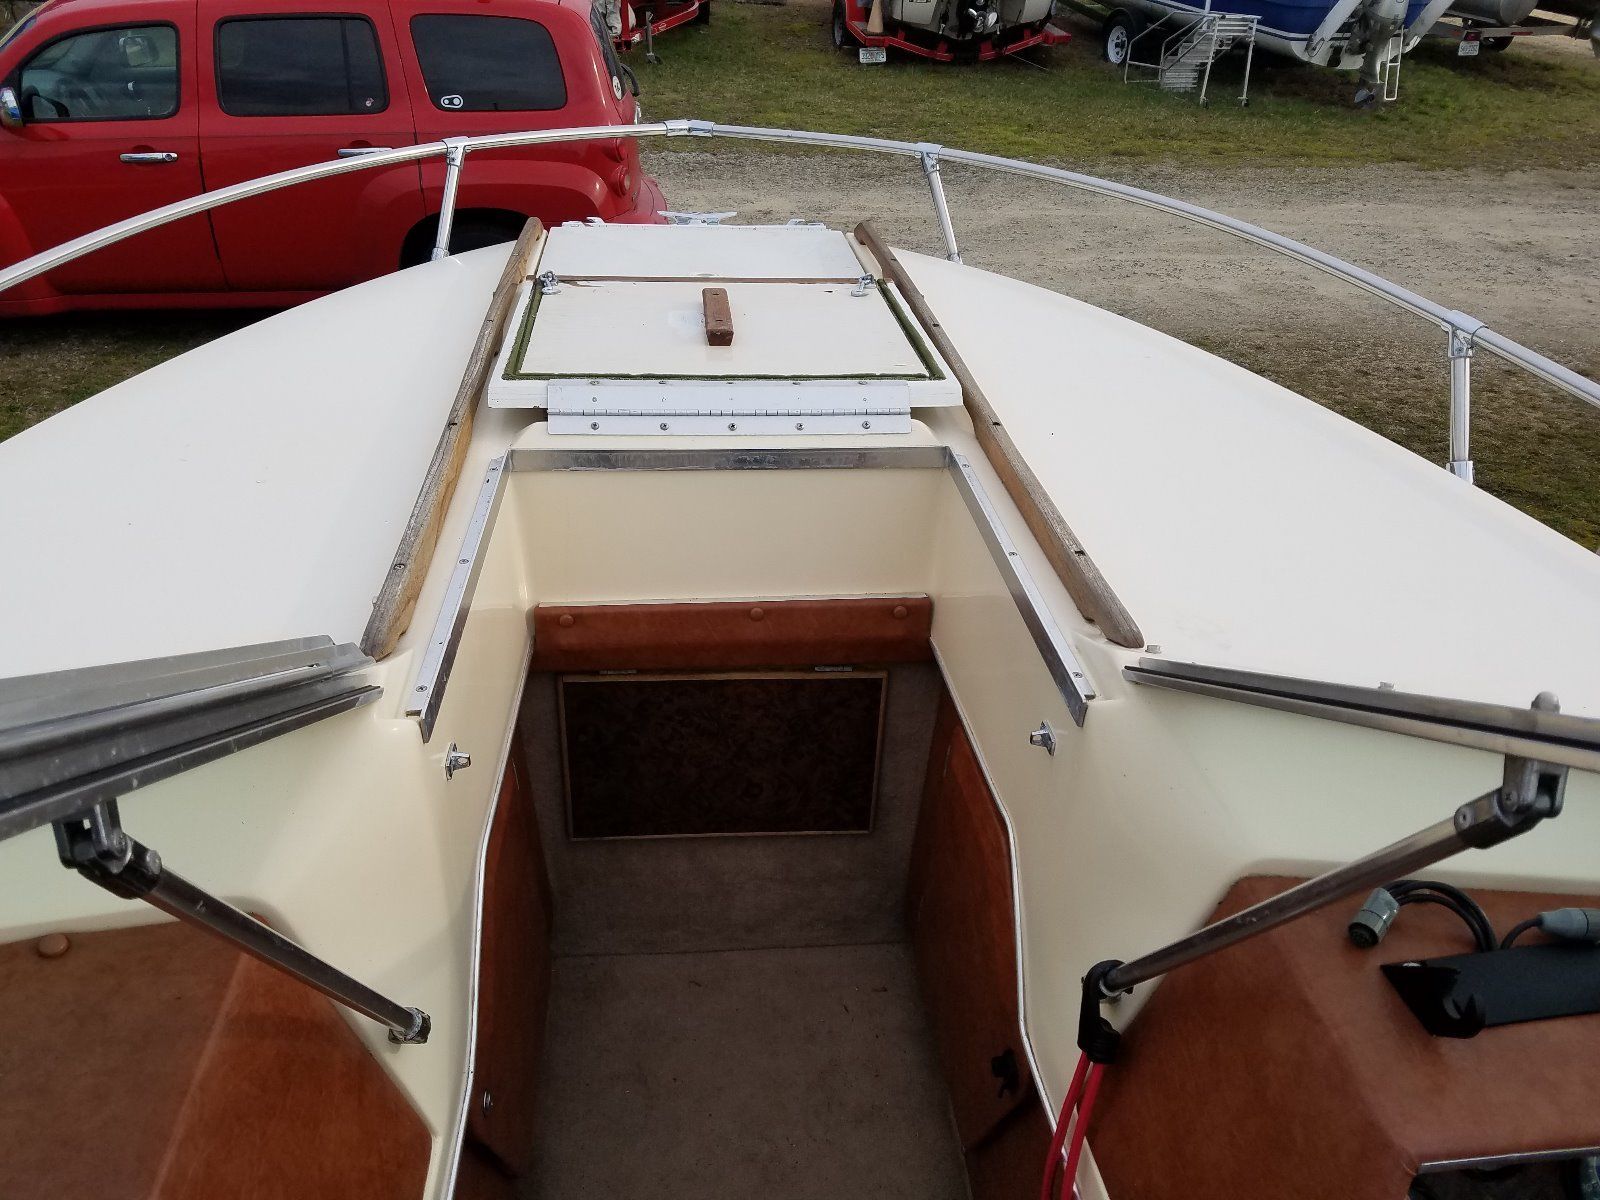 Sea Ray SRV 200 1978 for sale for $4,000 - Boats-from-USA.com